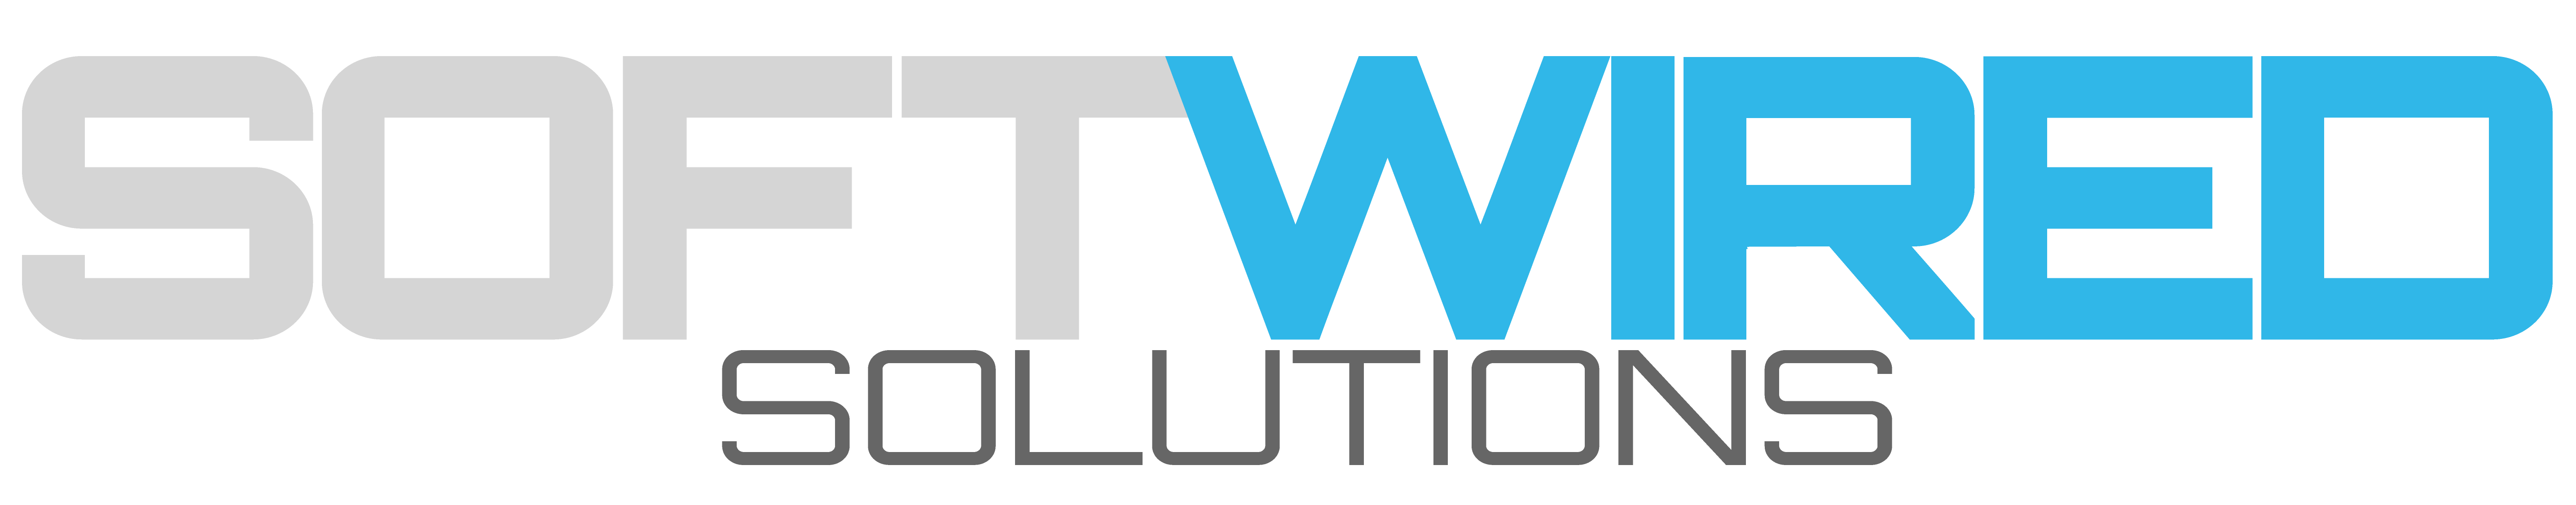 softwired solutions logo